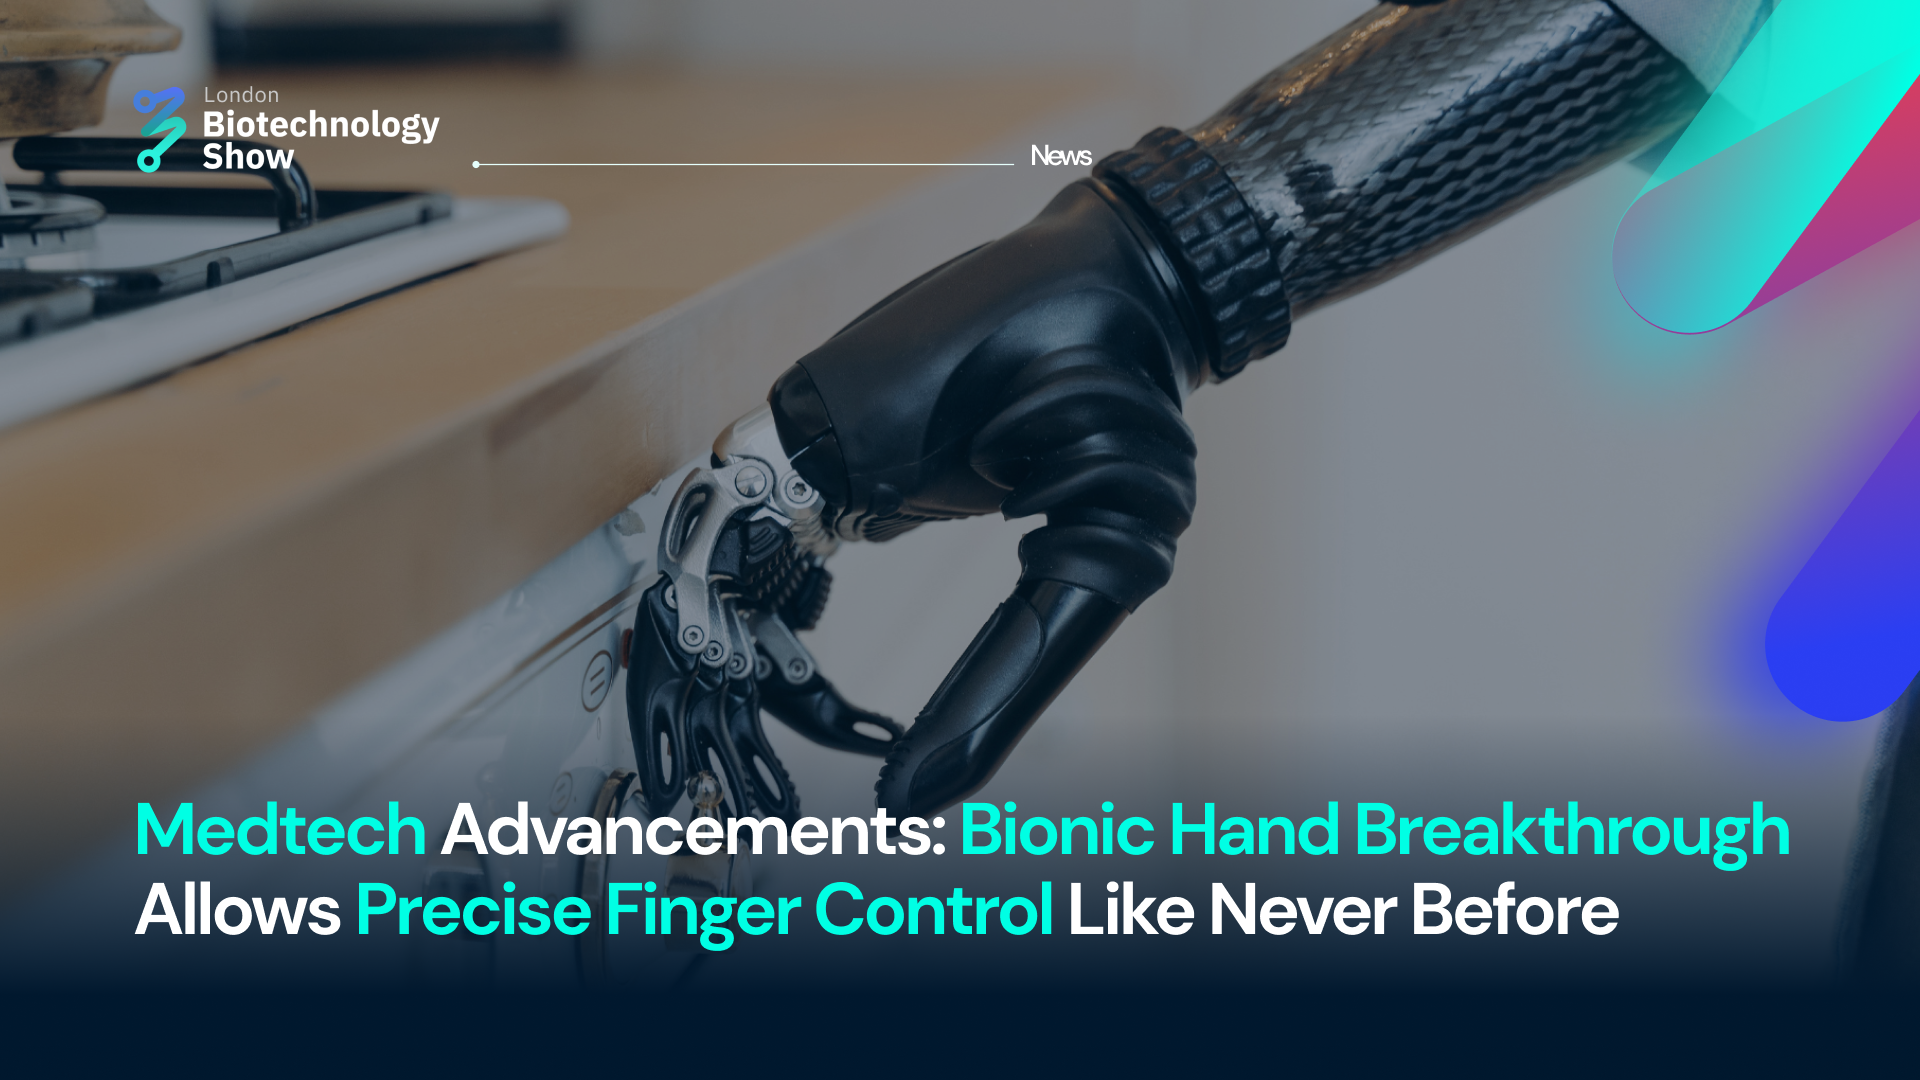 Medtech Advancements: Bionic Hand Breakthrough Allows Precise Finger Control Like Never Before